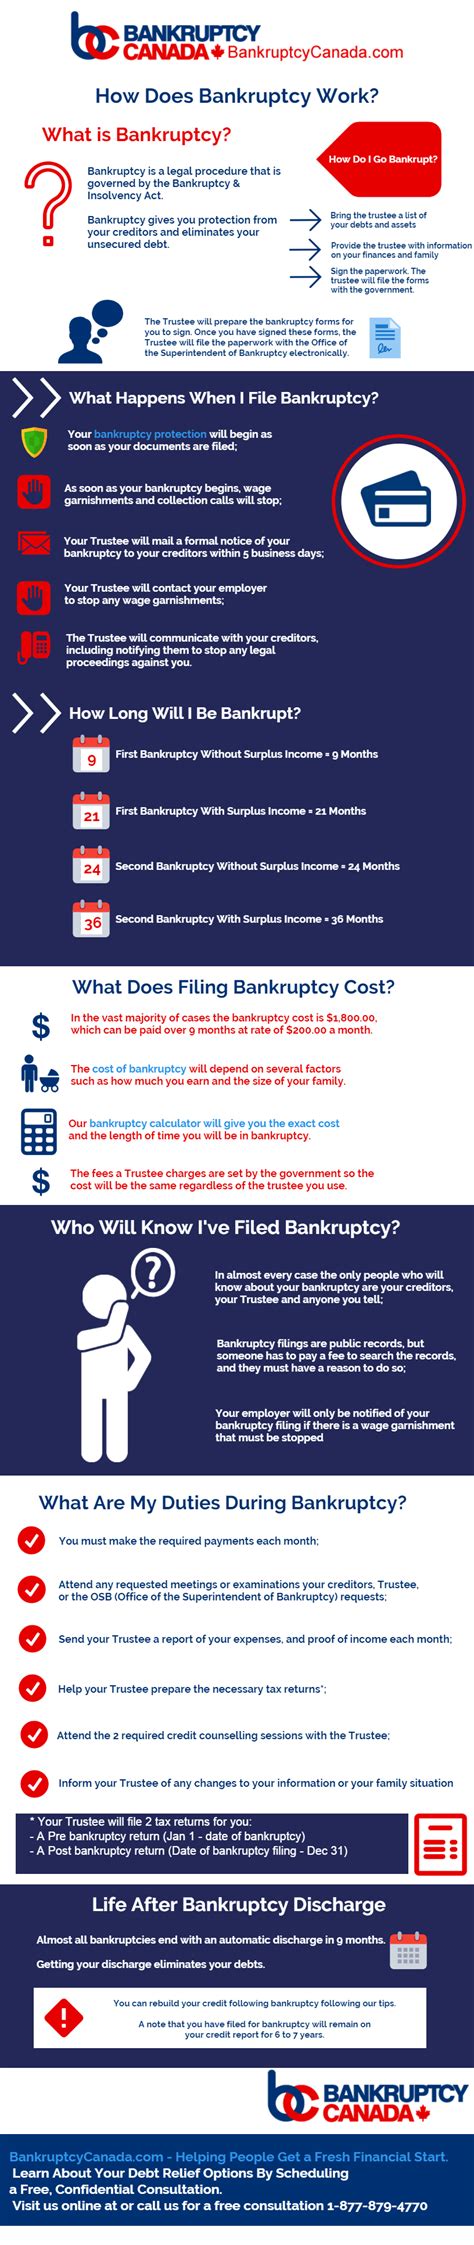 Do you think the same way? How Bankruptcy Works in Canada - Bankruptcy Canada